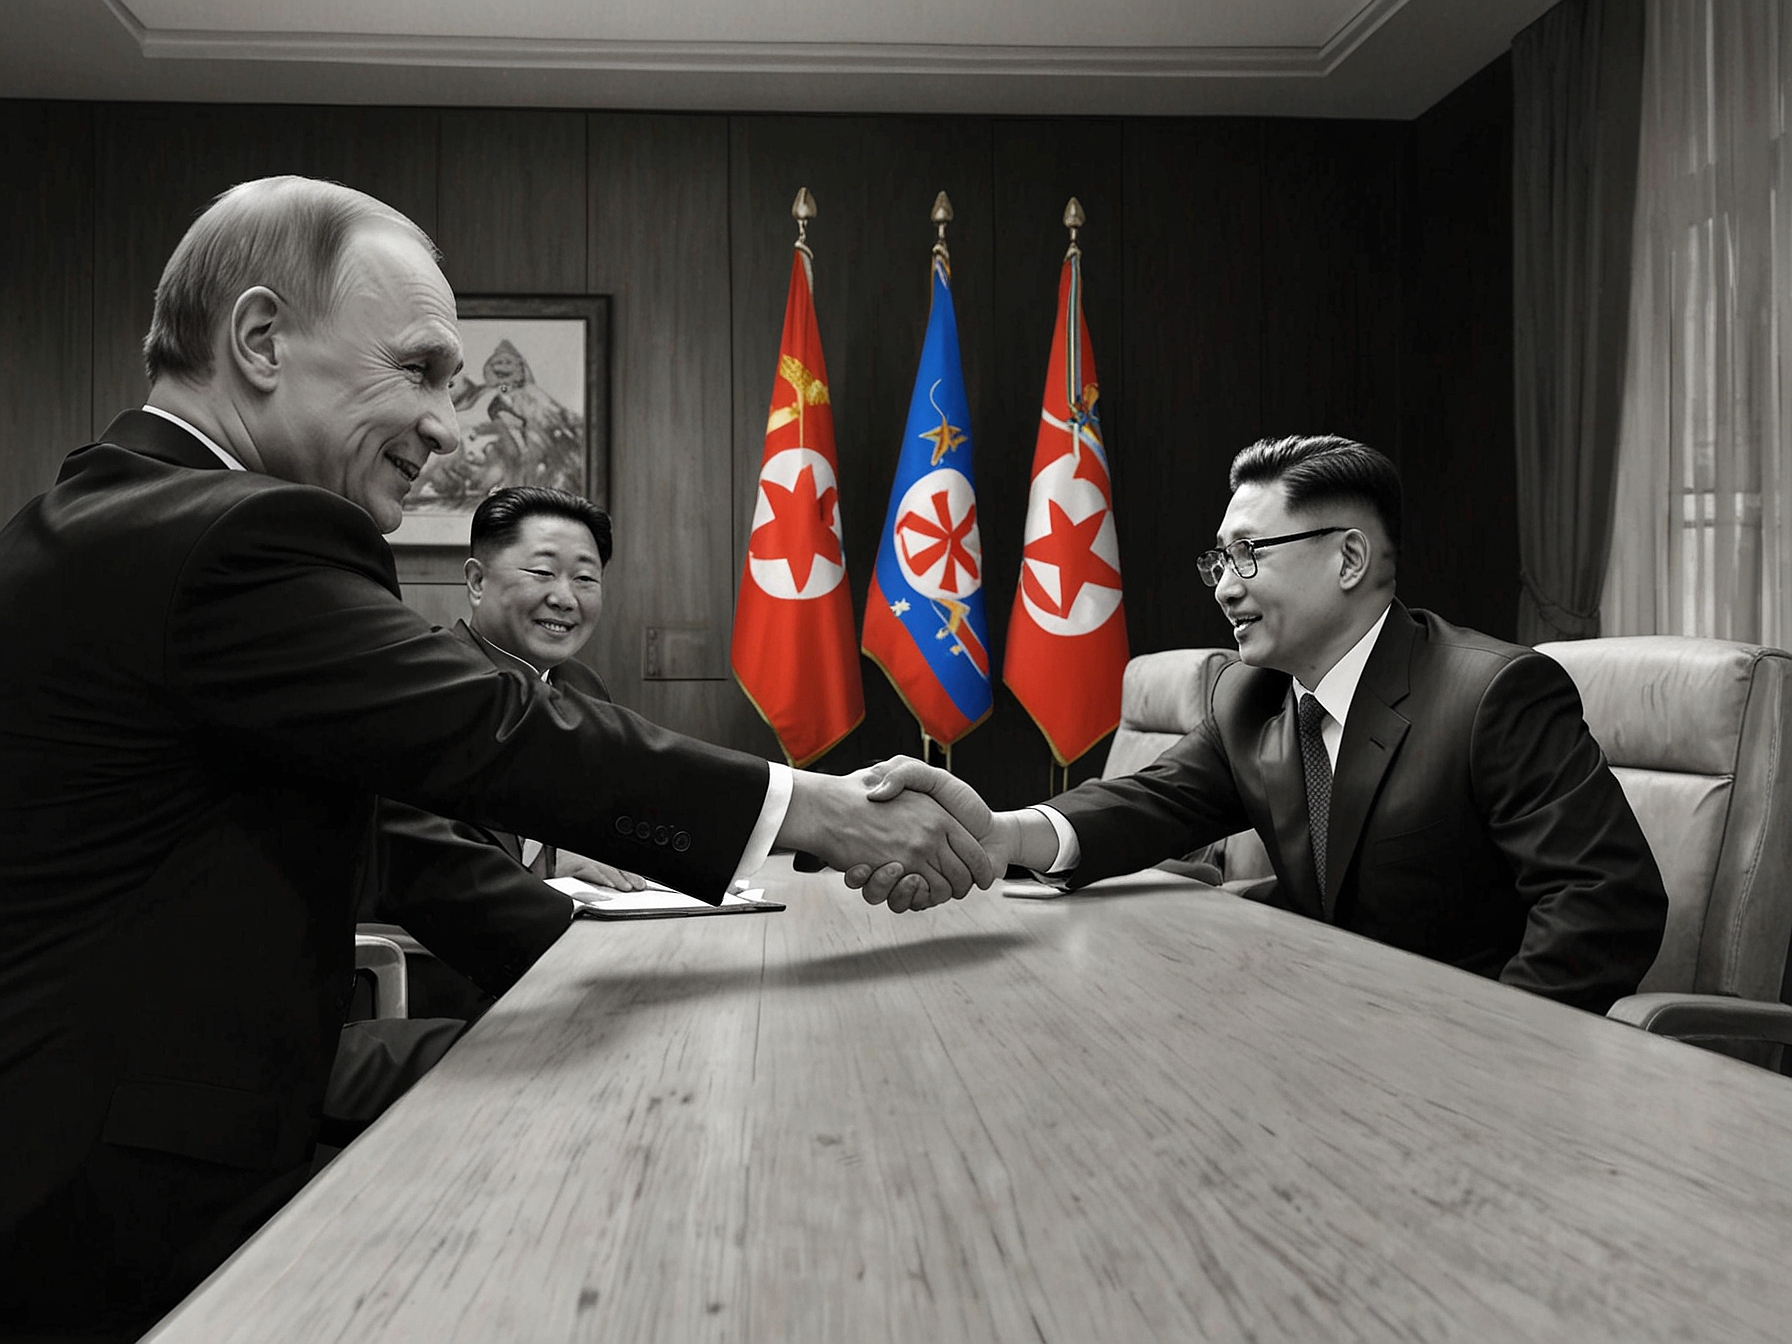 Vladimir Putin and Kim Jong-un shaking hands during a historic visit, reflecting Russia's renewed engagement with North Korea amidst shifting geopolitical dynamics in Northeast Asia.